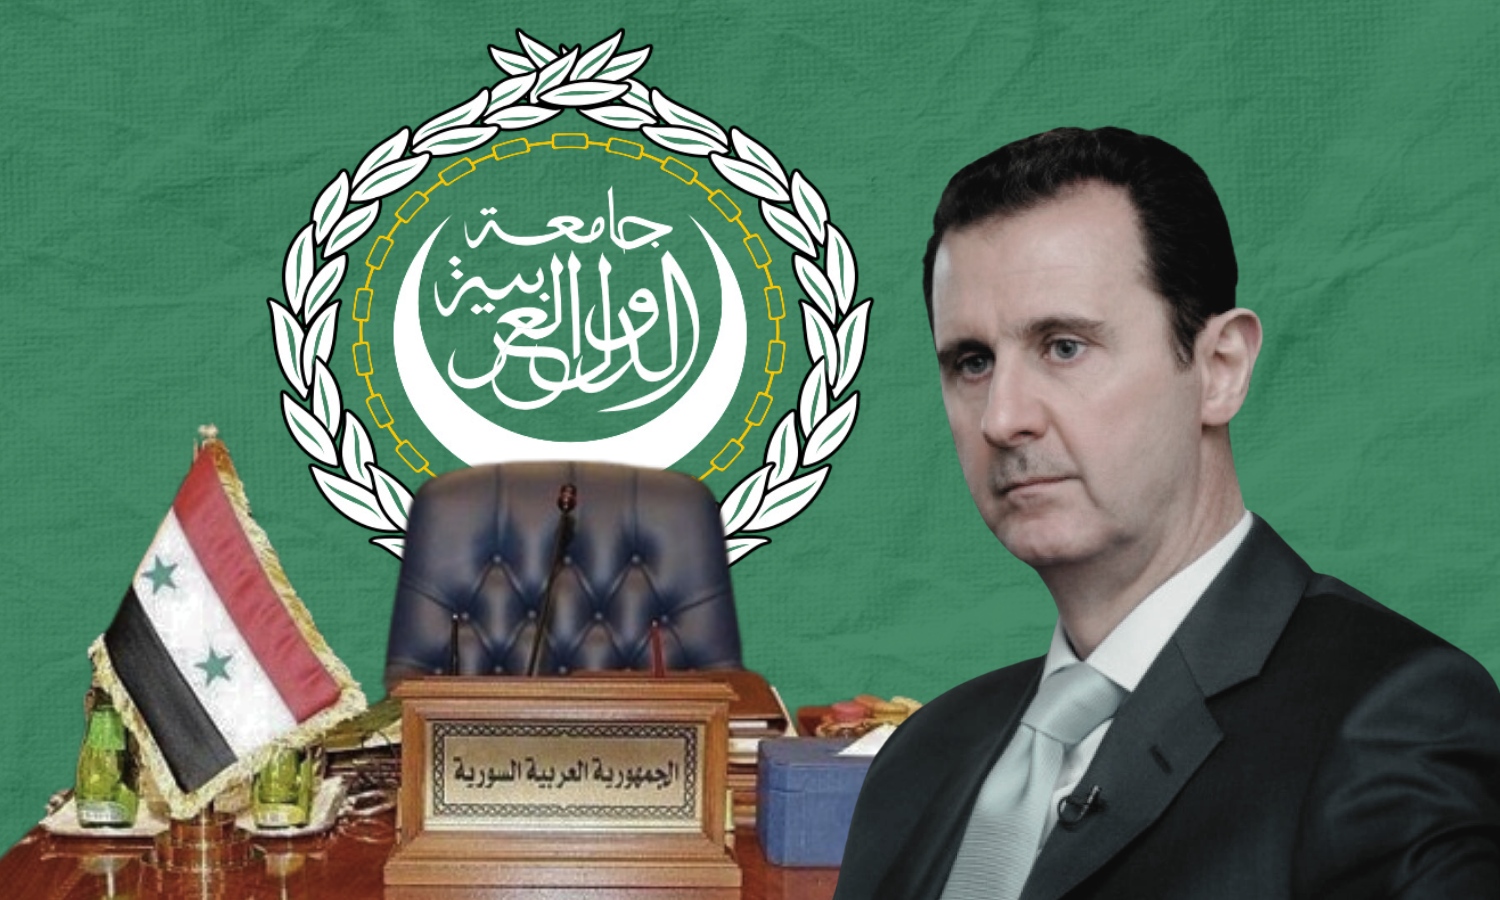 The head of the Syrian regime, Bashar al-Assad, and Syria’s seat in the Arab League, with the emblem of the Arab League (edited by Enab Baladi)